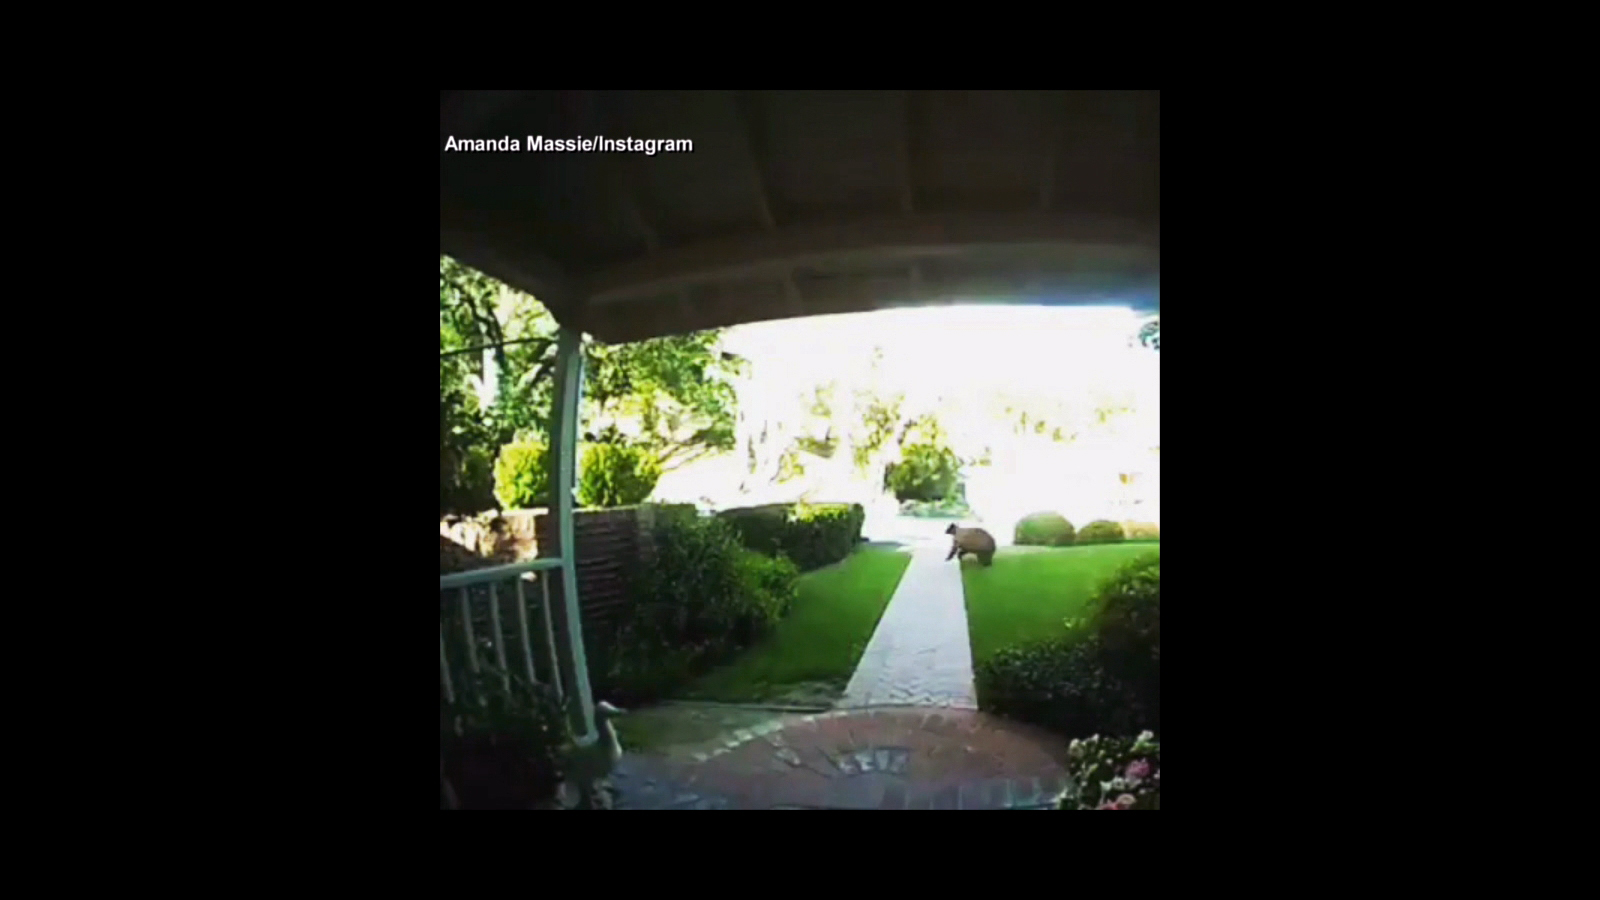 PHOTO: A grandmother in Altadena, Calif., hustled her granddaughter inside as a brown bear romped through the yard.